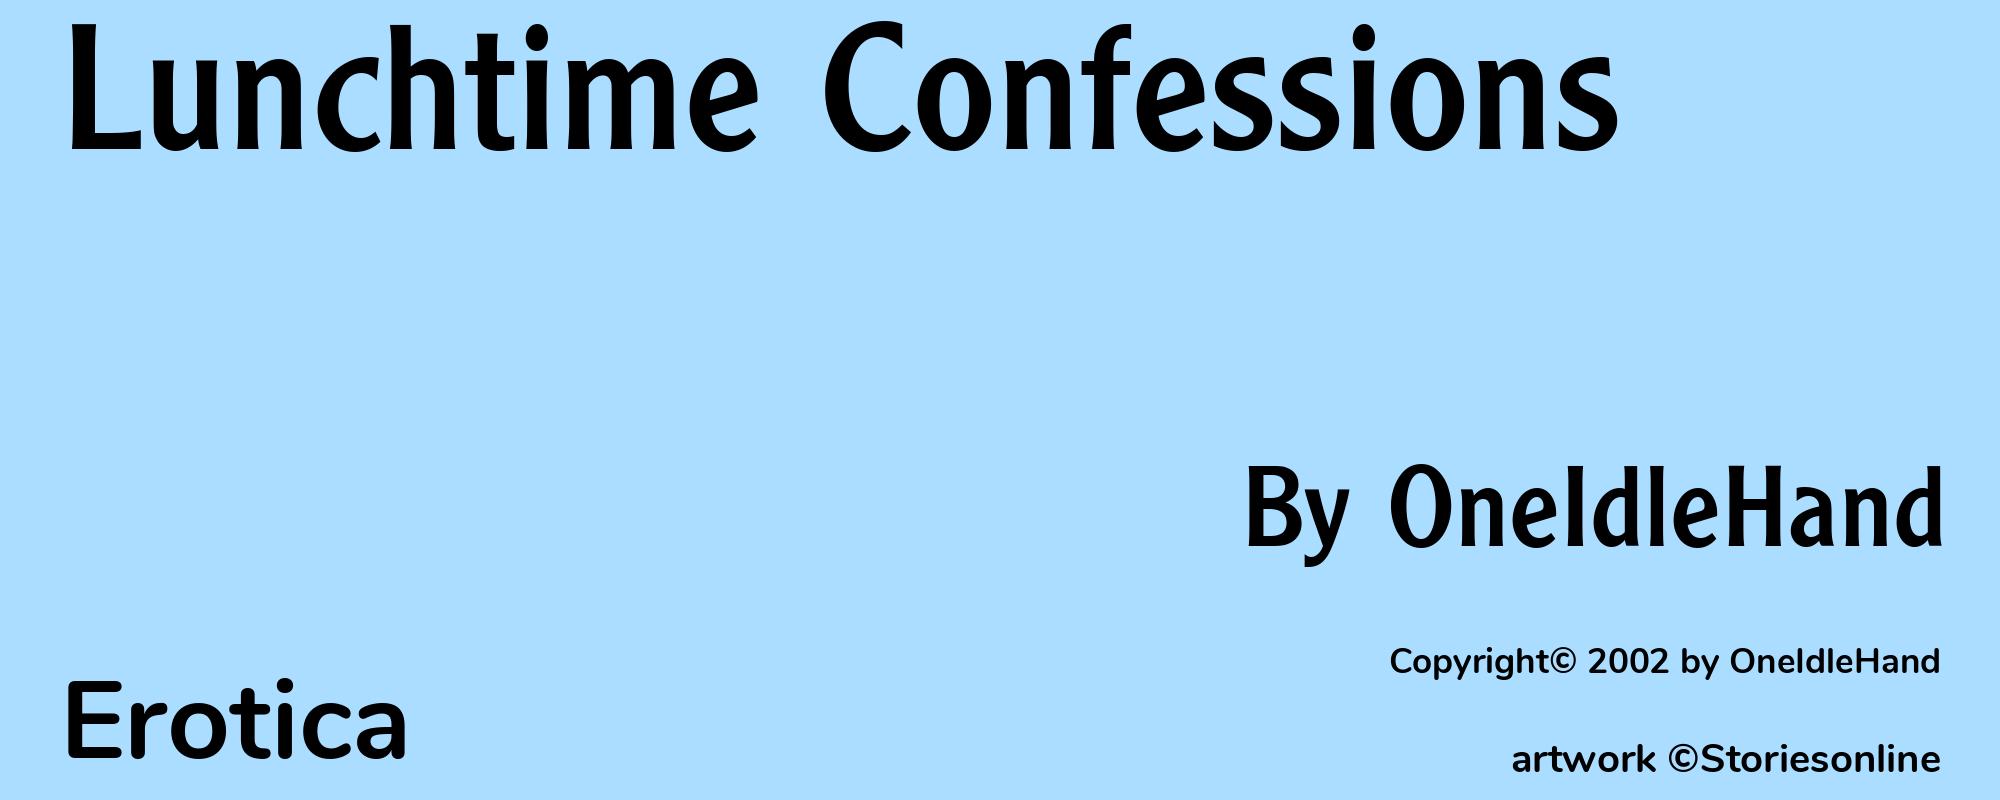 Lunchtime Confessions - Cover